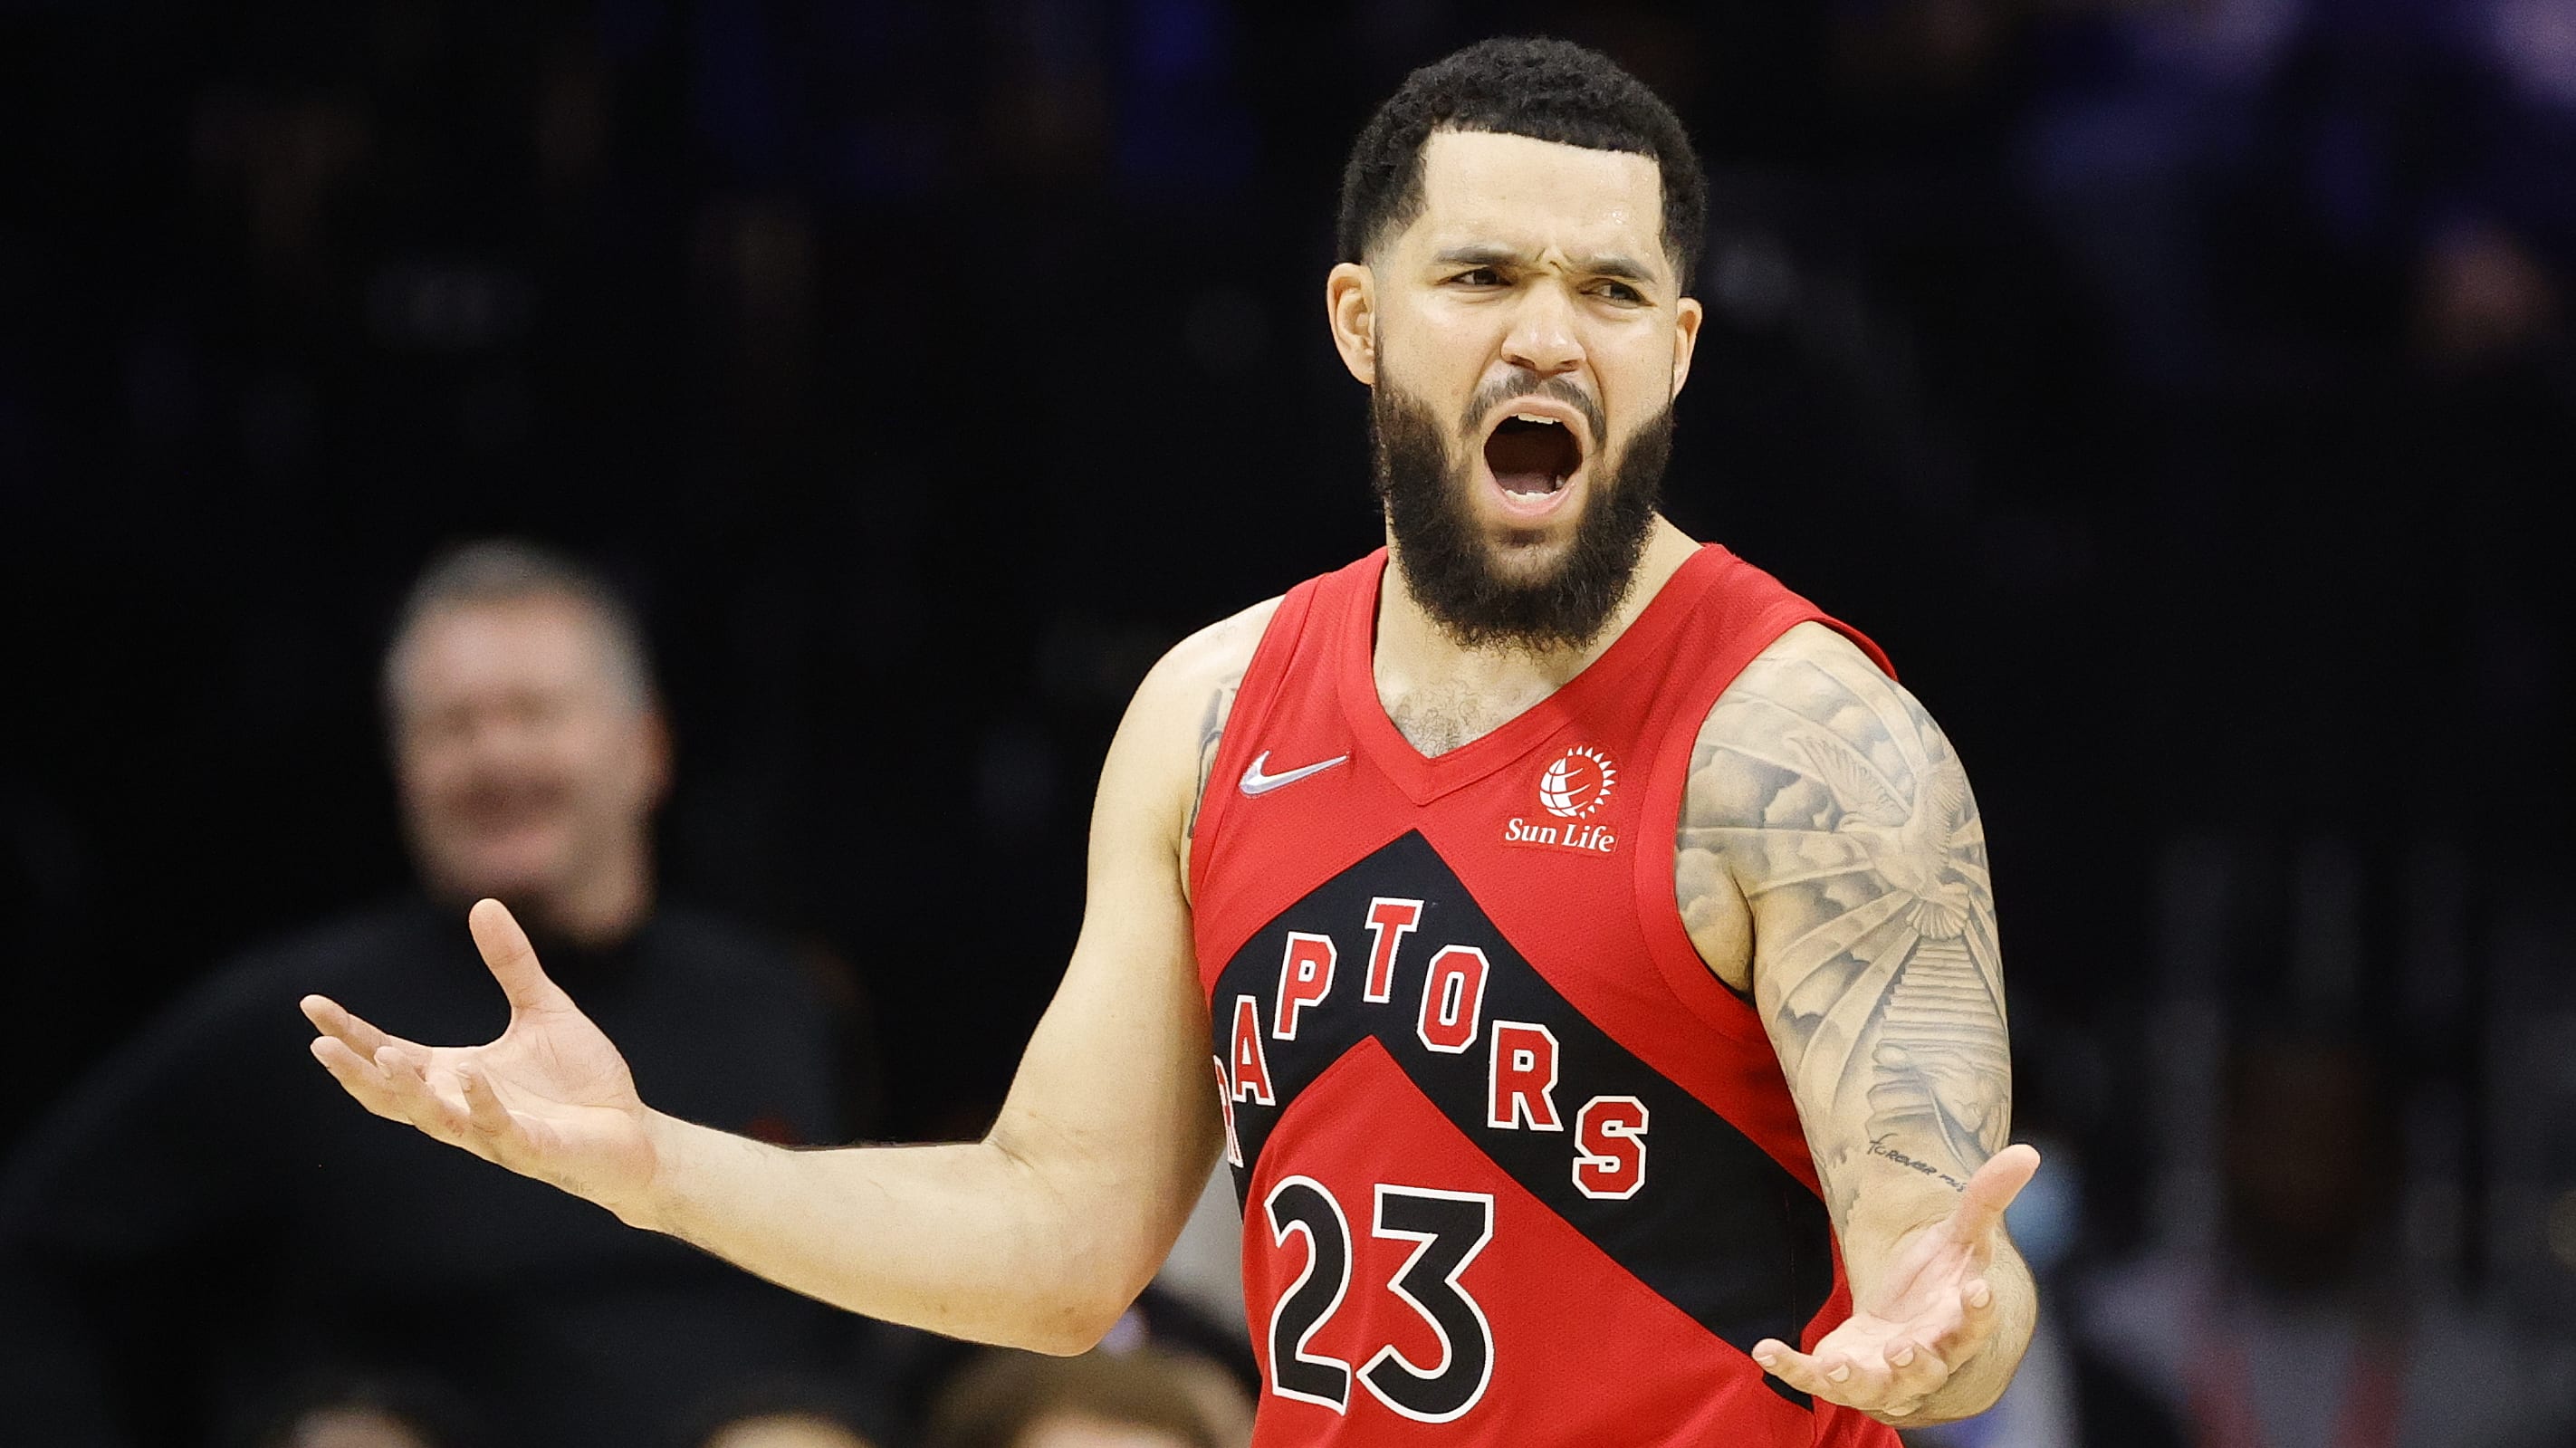 NBA May Have Quietly Punished Ref Who Sparked Fred VanVleet Tirade